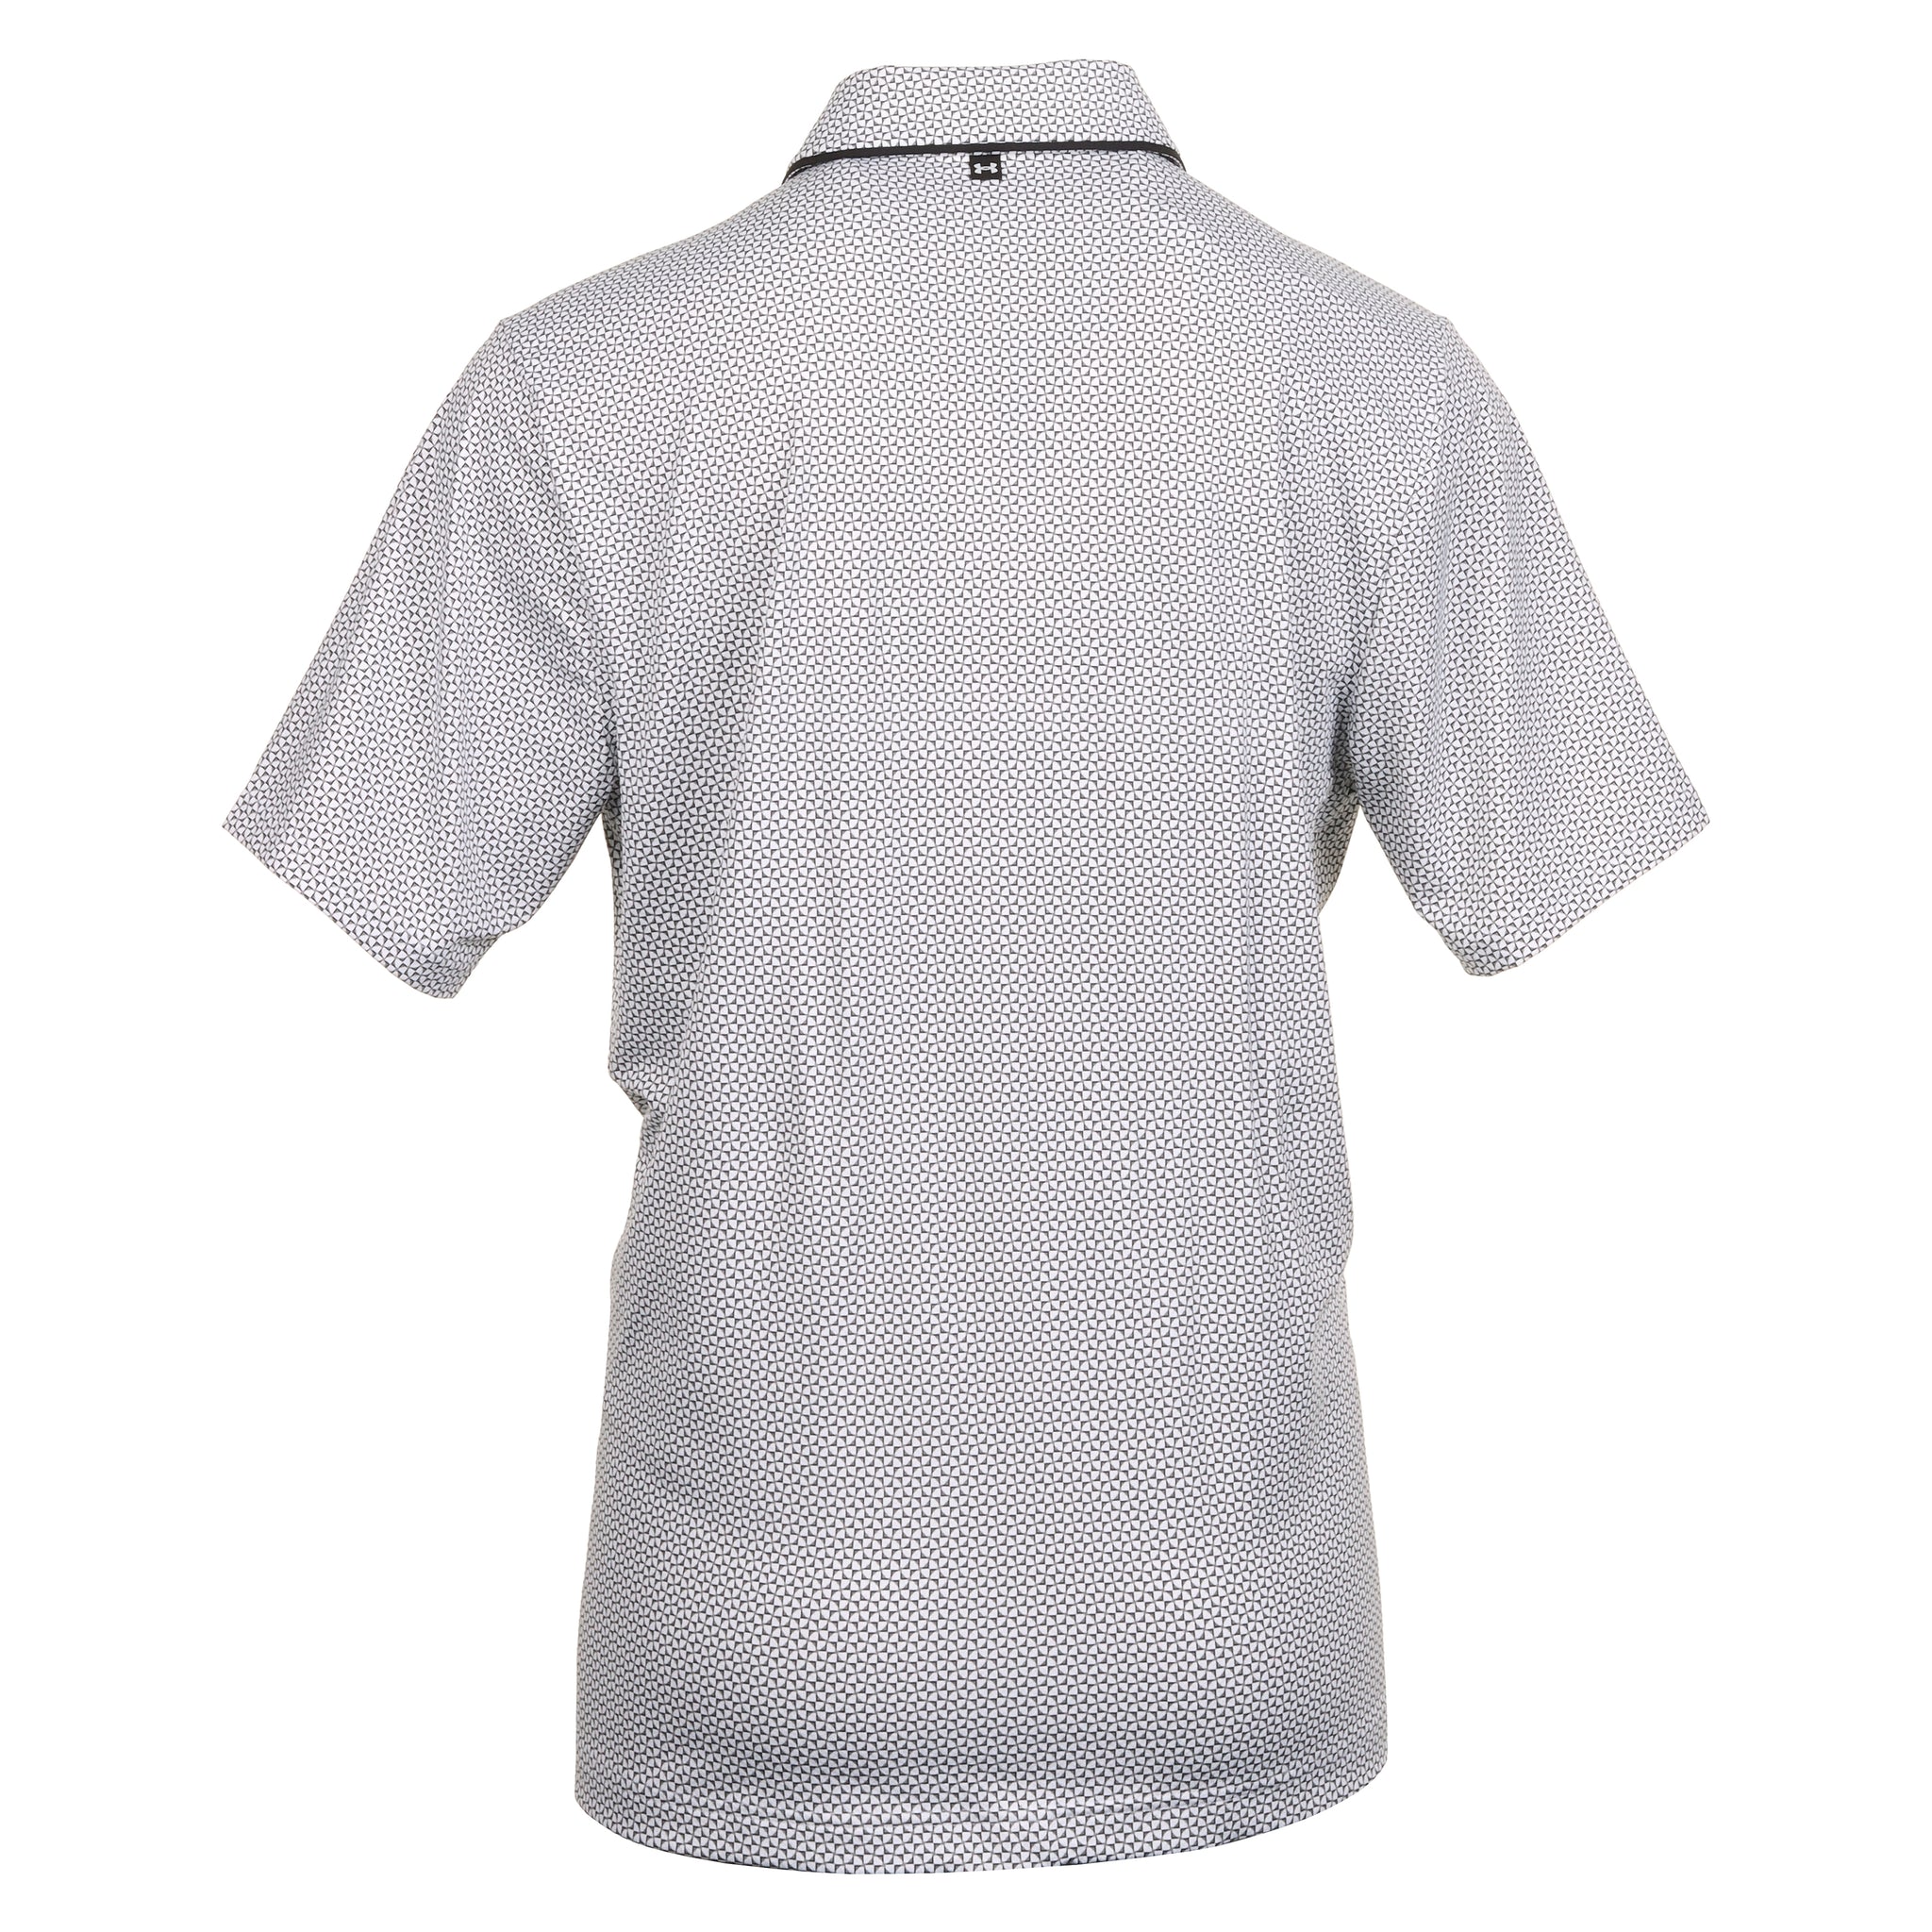 Under Armour Golf Iso-Chill Verge Shirt 1377366 White Halo Grey